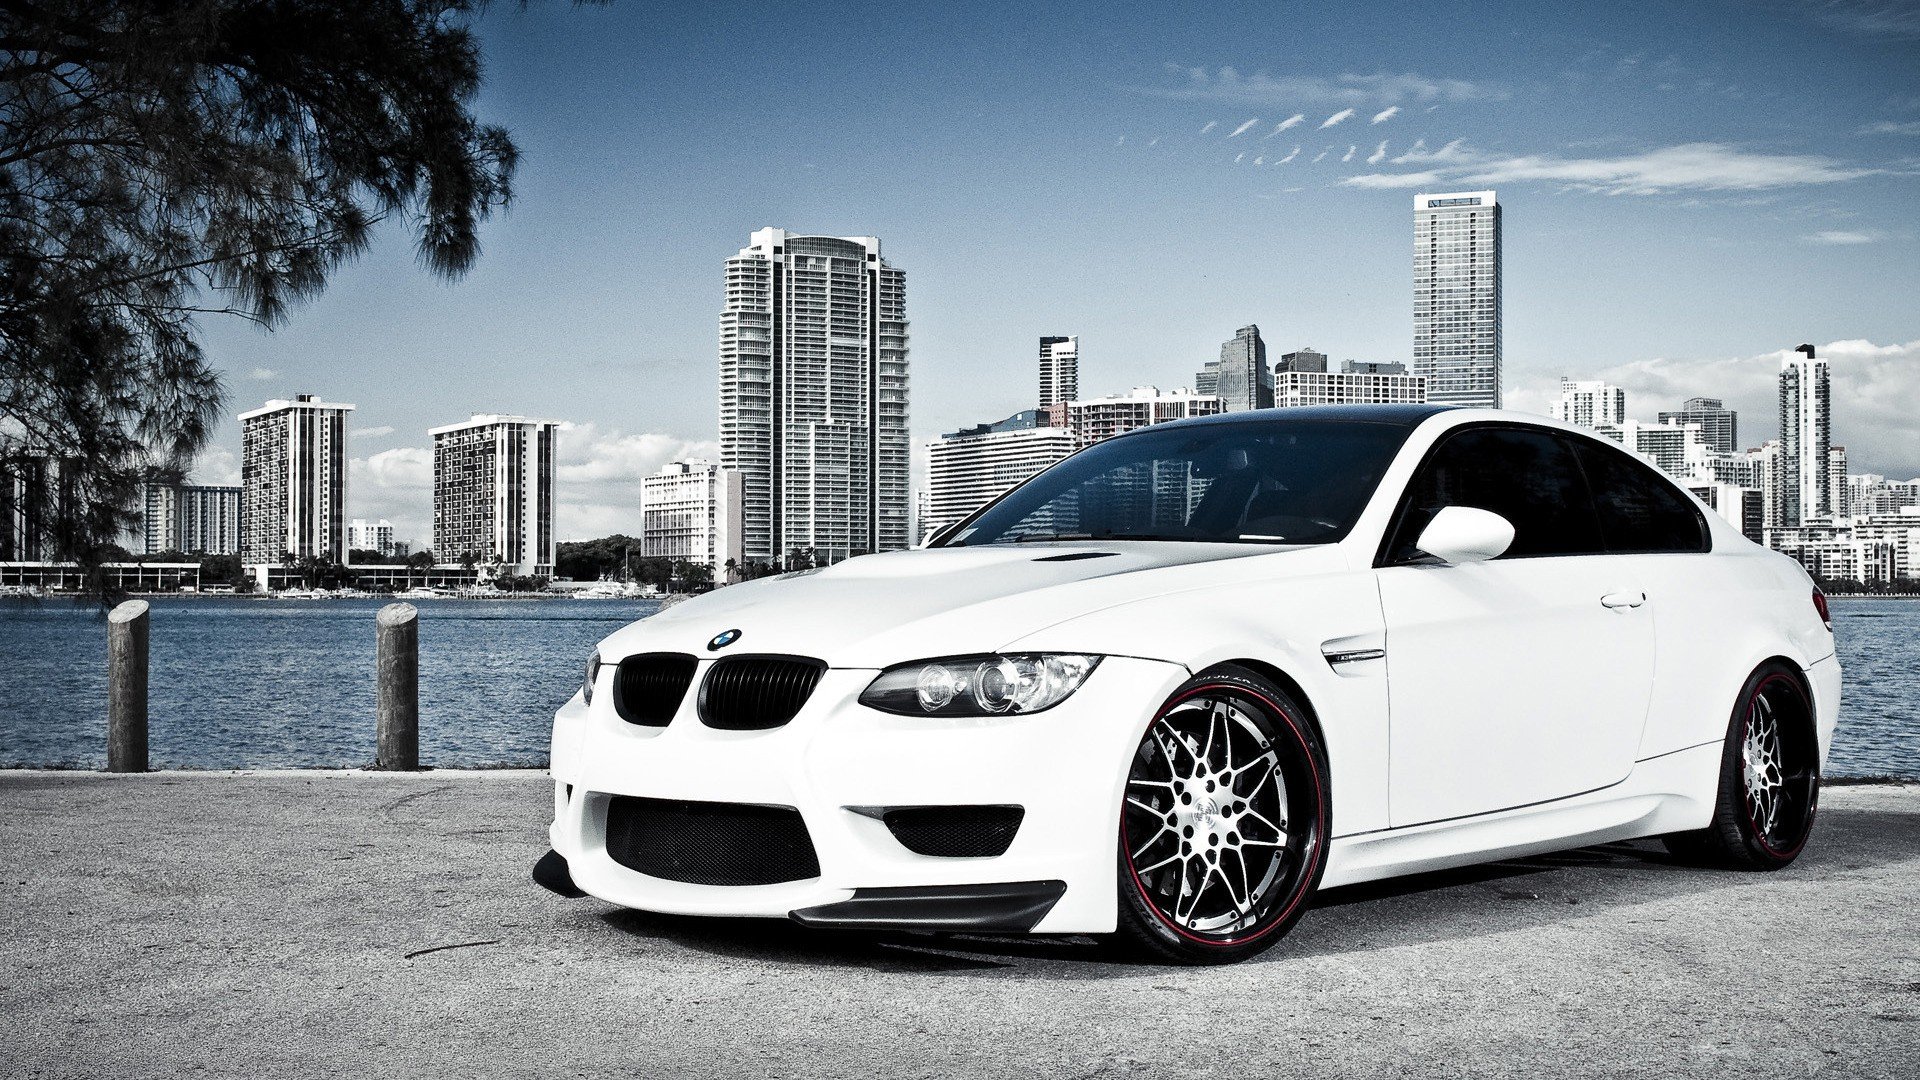 bmw, Cars, Vehicles, Wheels, Bmw, M3, Bmw, E92, Automobiles Wallpapers HD /  Desktop and Mobile Backgrounds